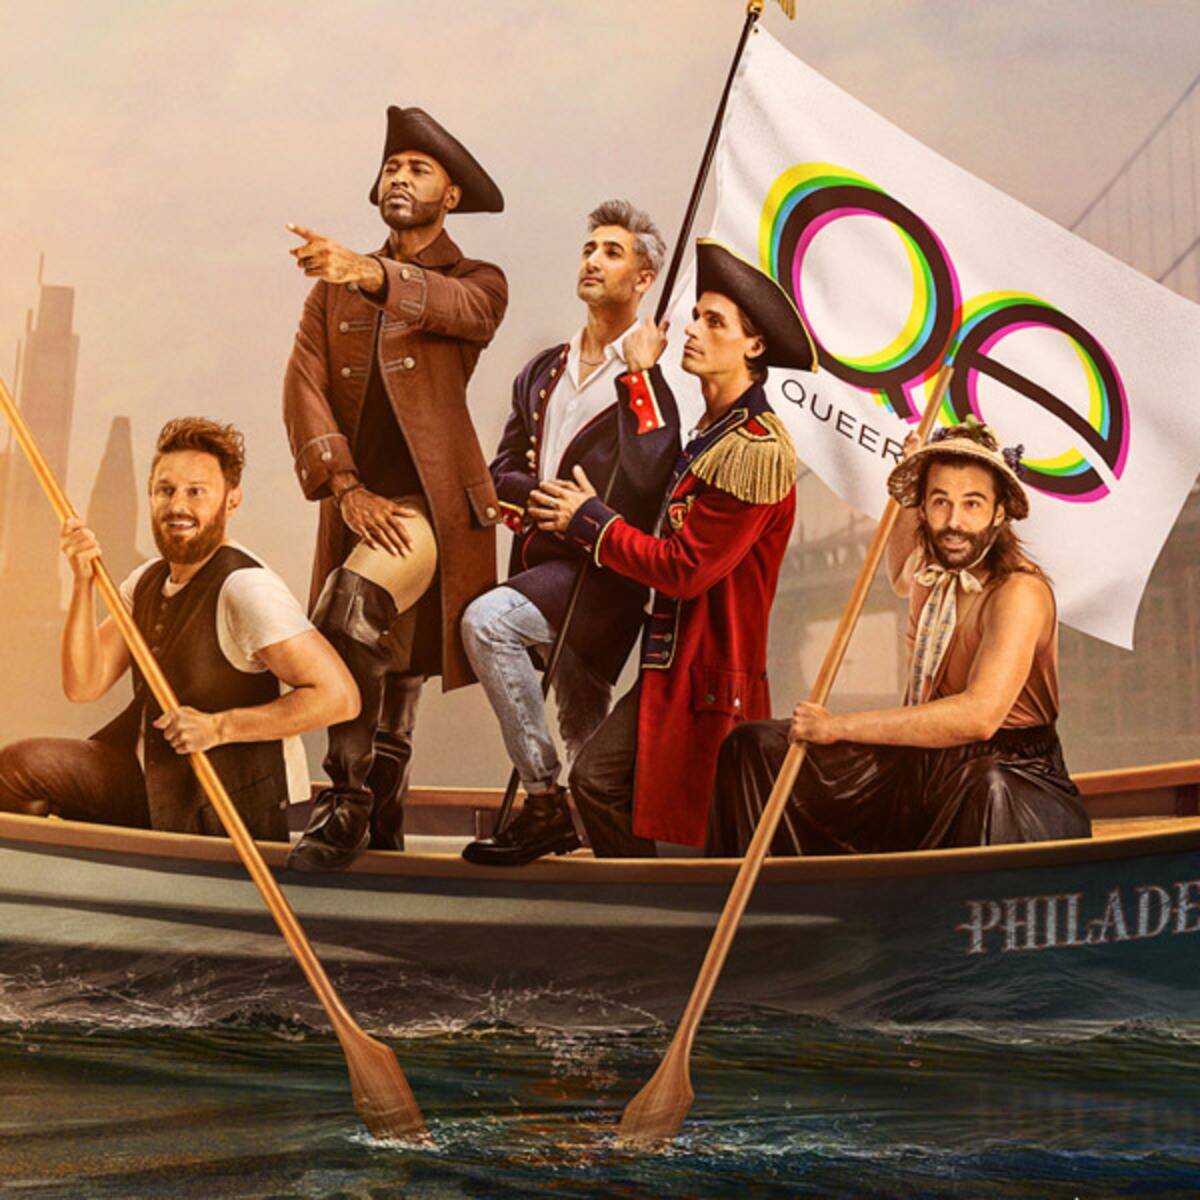 Netflix Announces ‘Queer Eye’ Season 5 Release Date And It’s So Soon